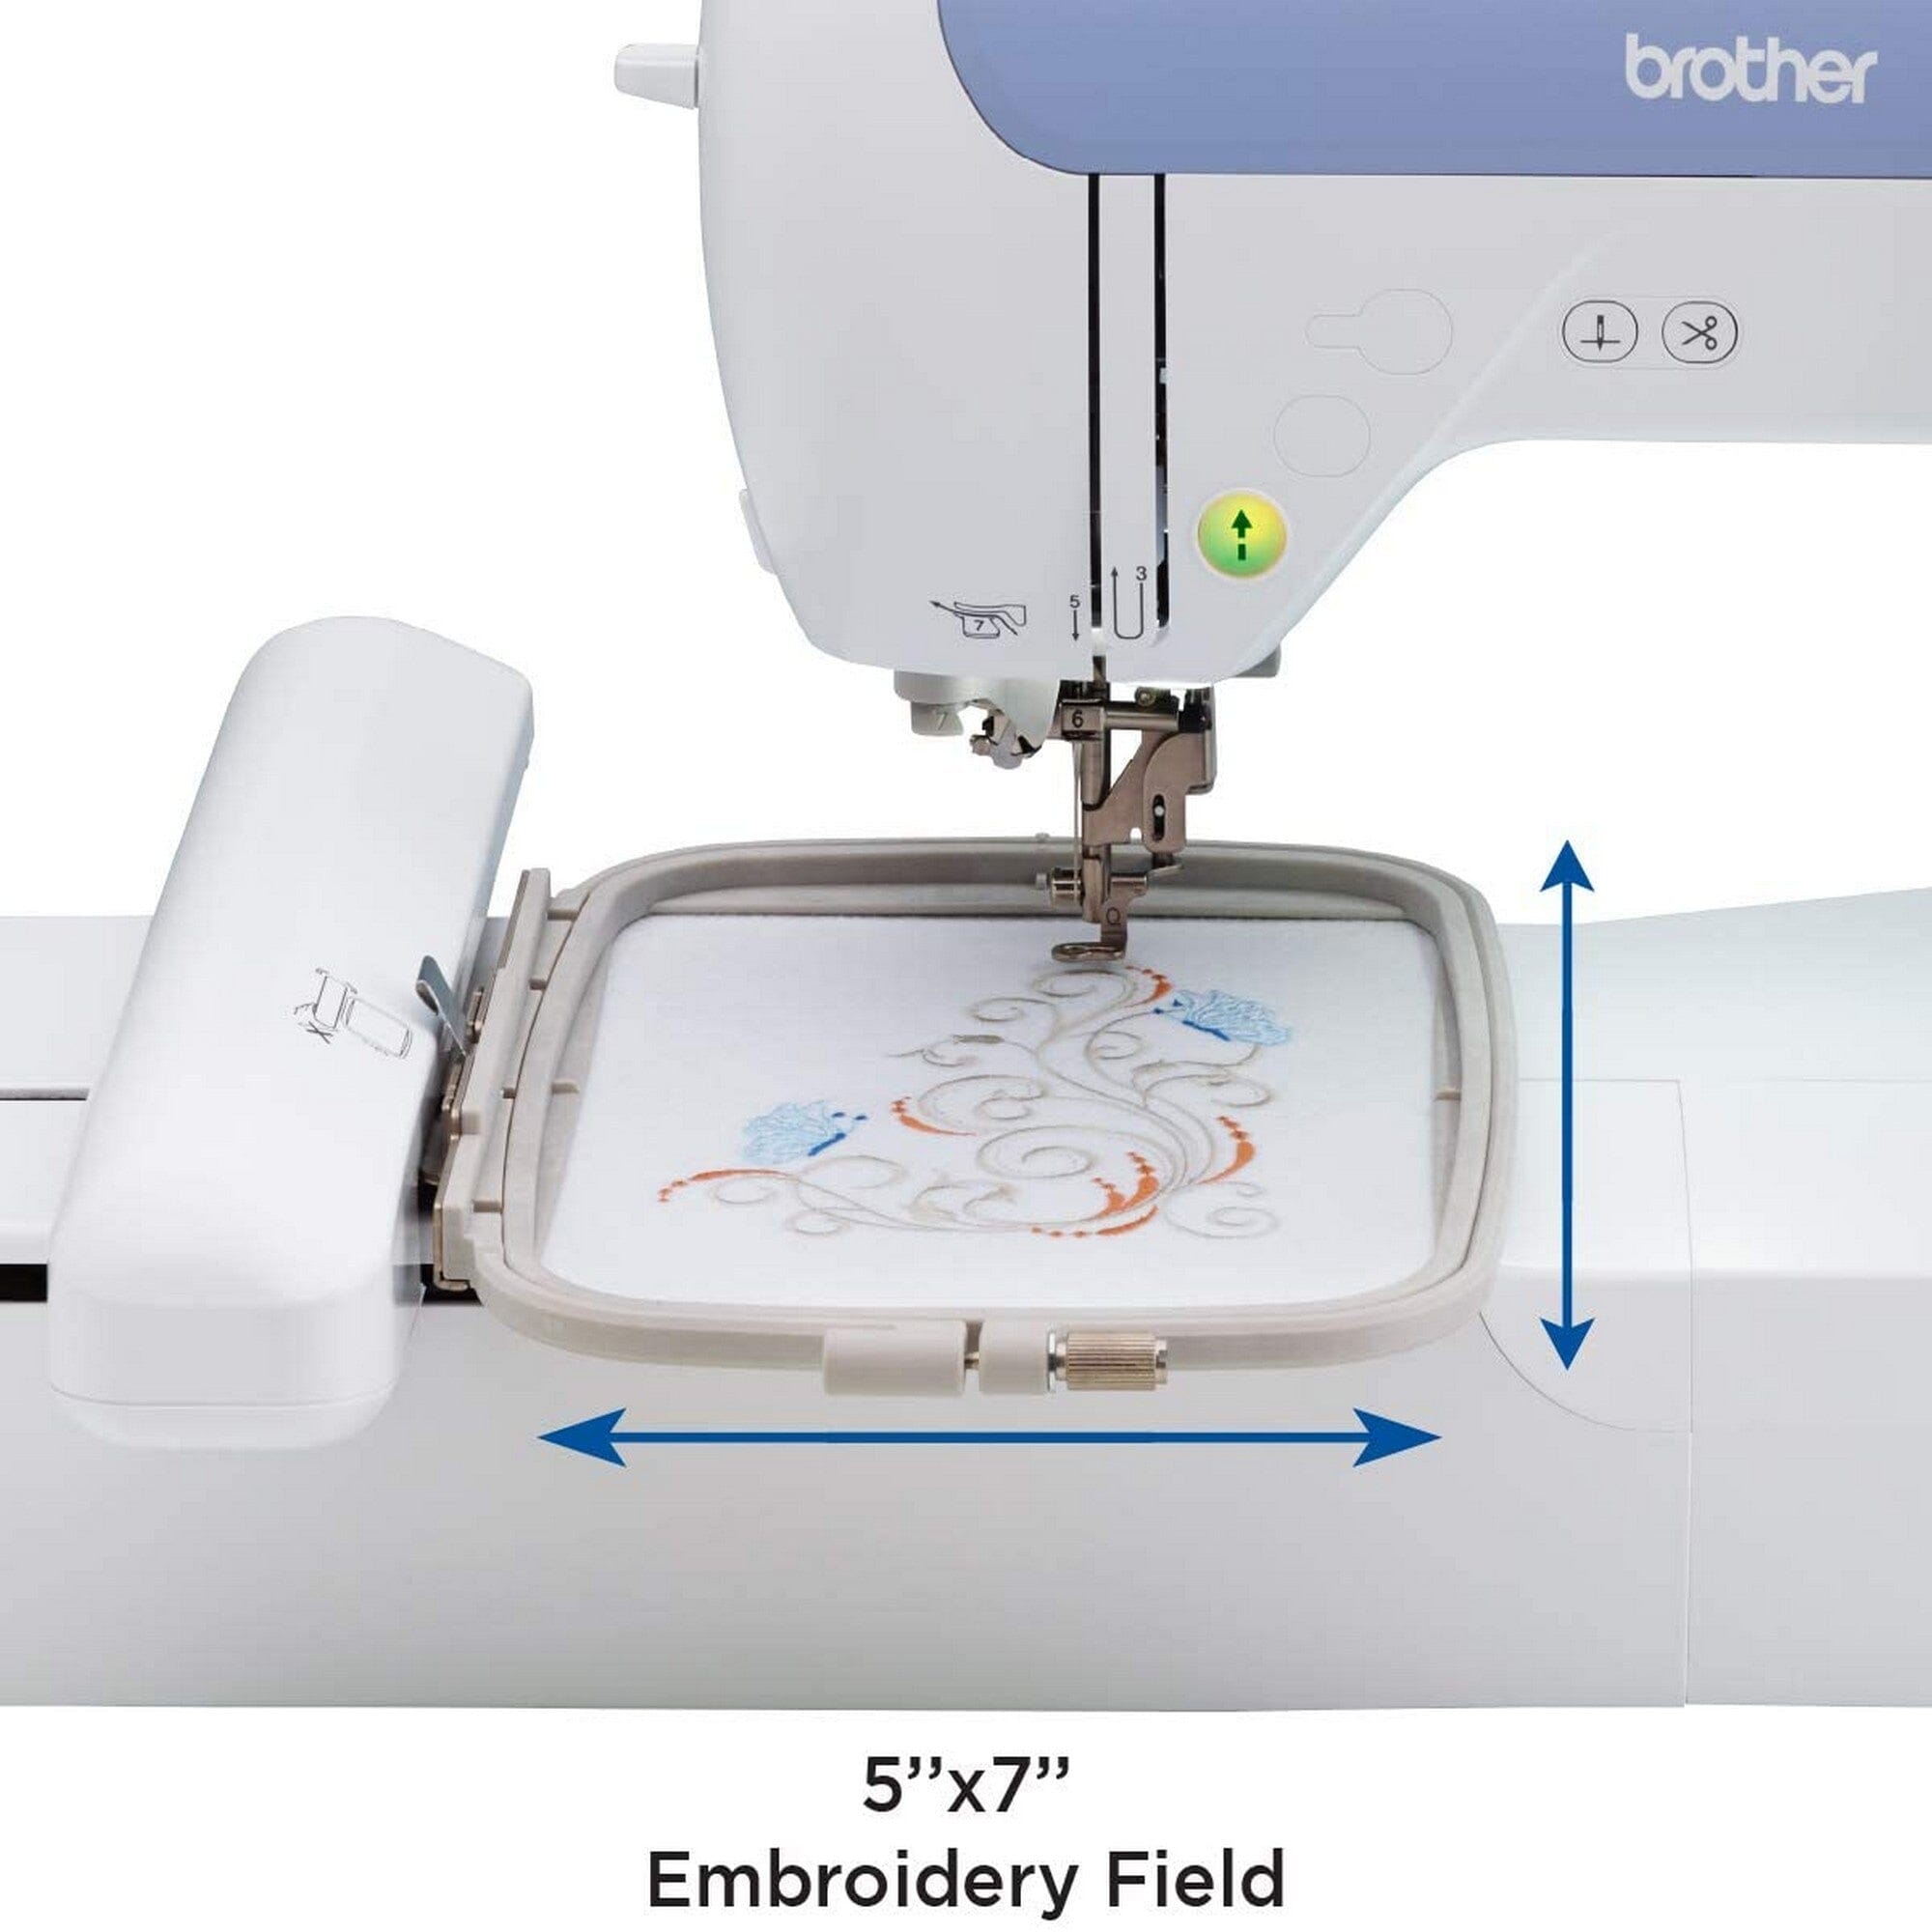  Brother PE900 Embroidery Machine, 5 x 7 Field Size, Cuts Jump  Stitches, Wireless, Includes Mr. Vac & Mrs. Sew - Embroidery Magic: Quick  Start Video : Everything Else